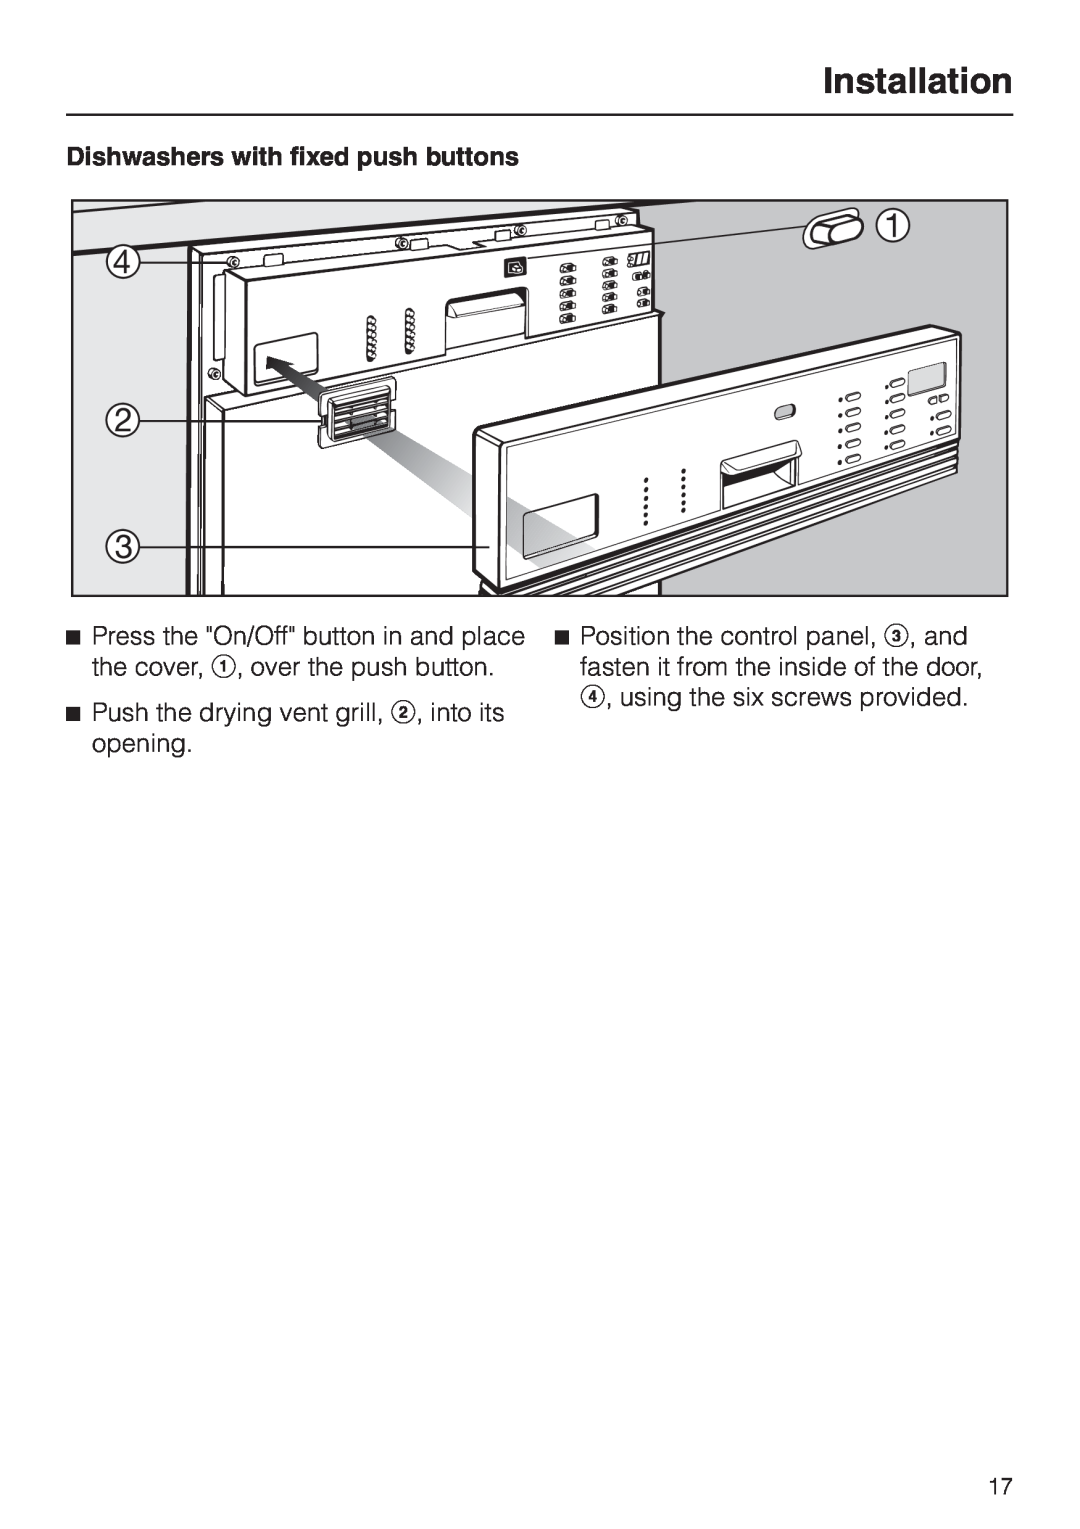 Miele HG02 installation instructions Dishwashers with fixed push buttons, Installation 